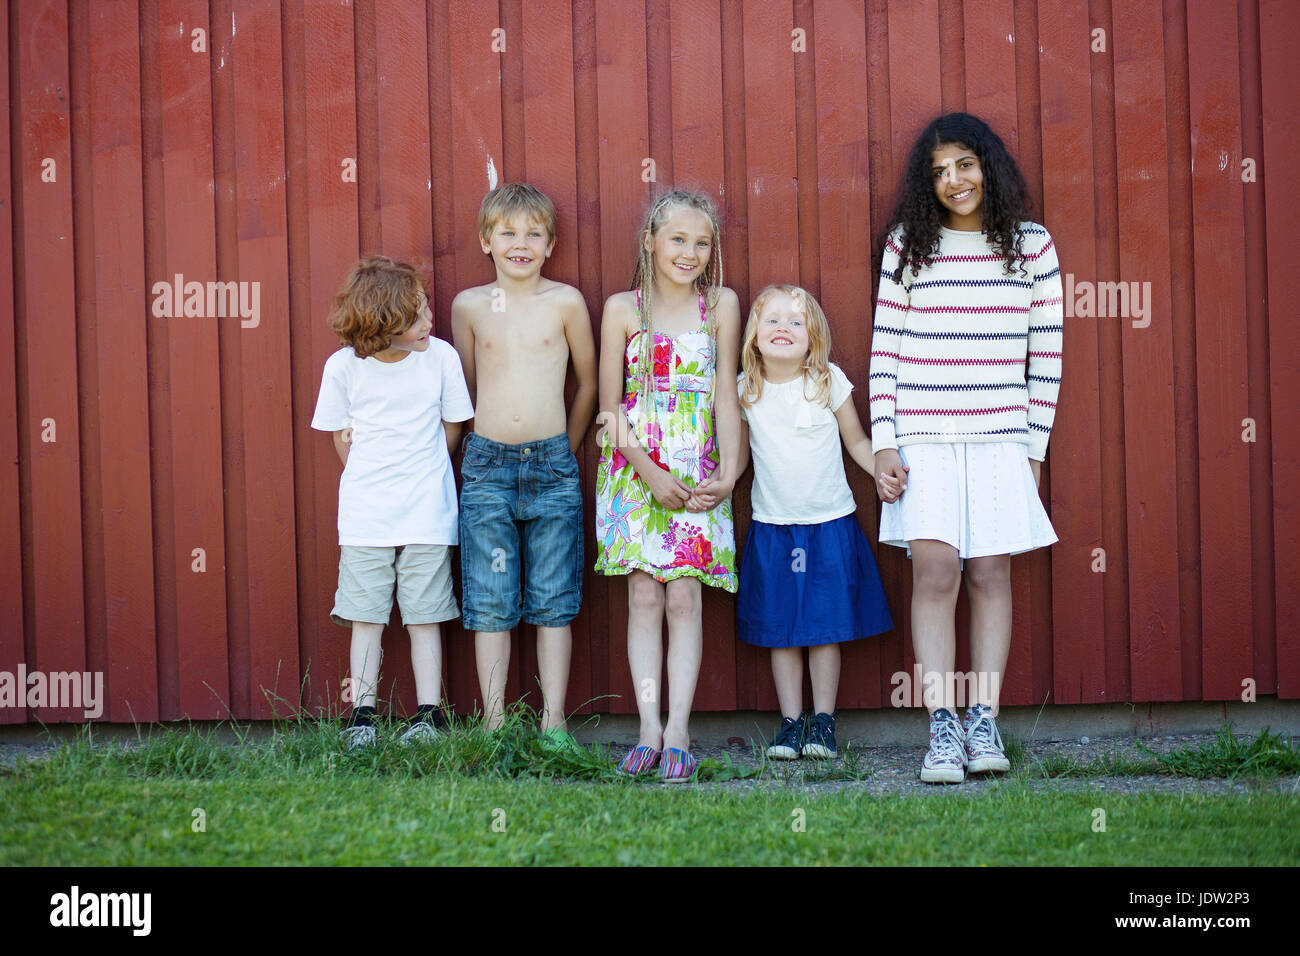 Children standing together outdoors Stock Photo